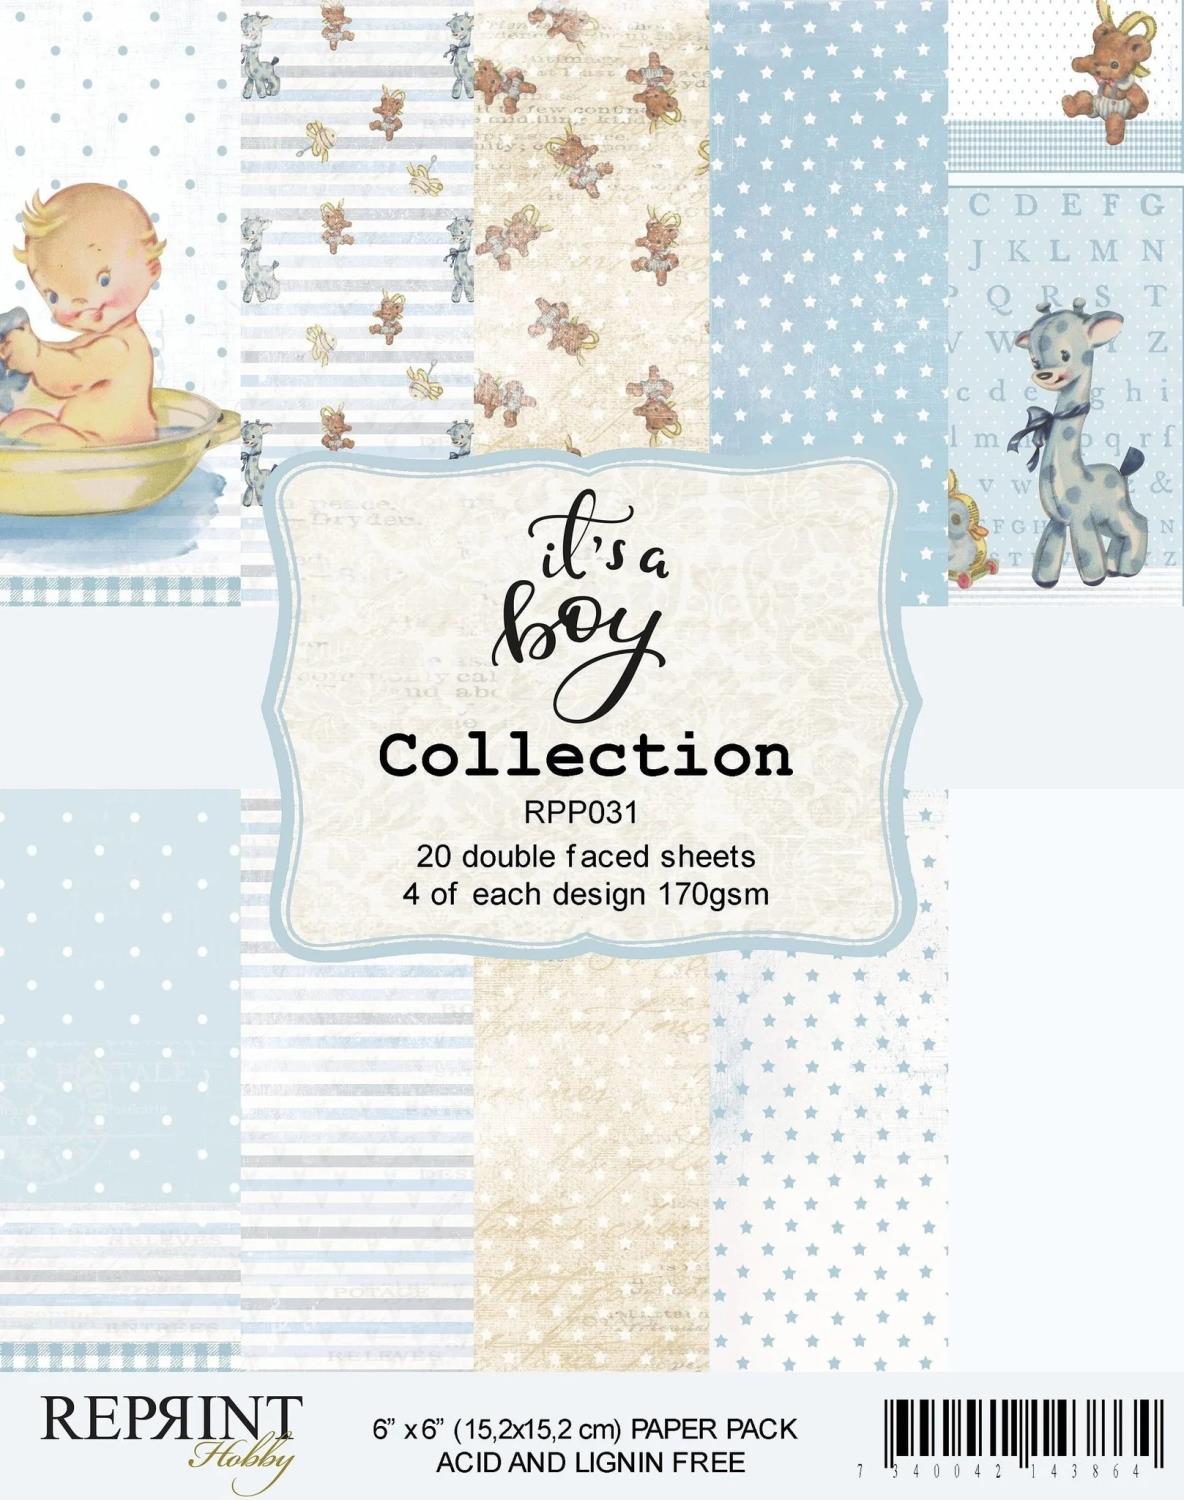 Reprint - It´s a Boy collection pack -  6x6